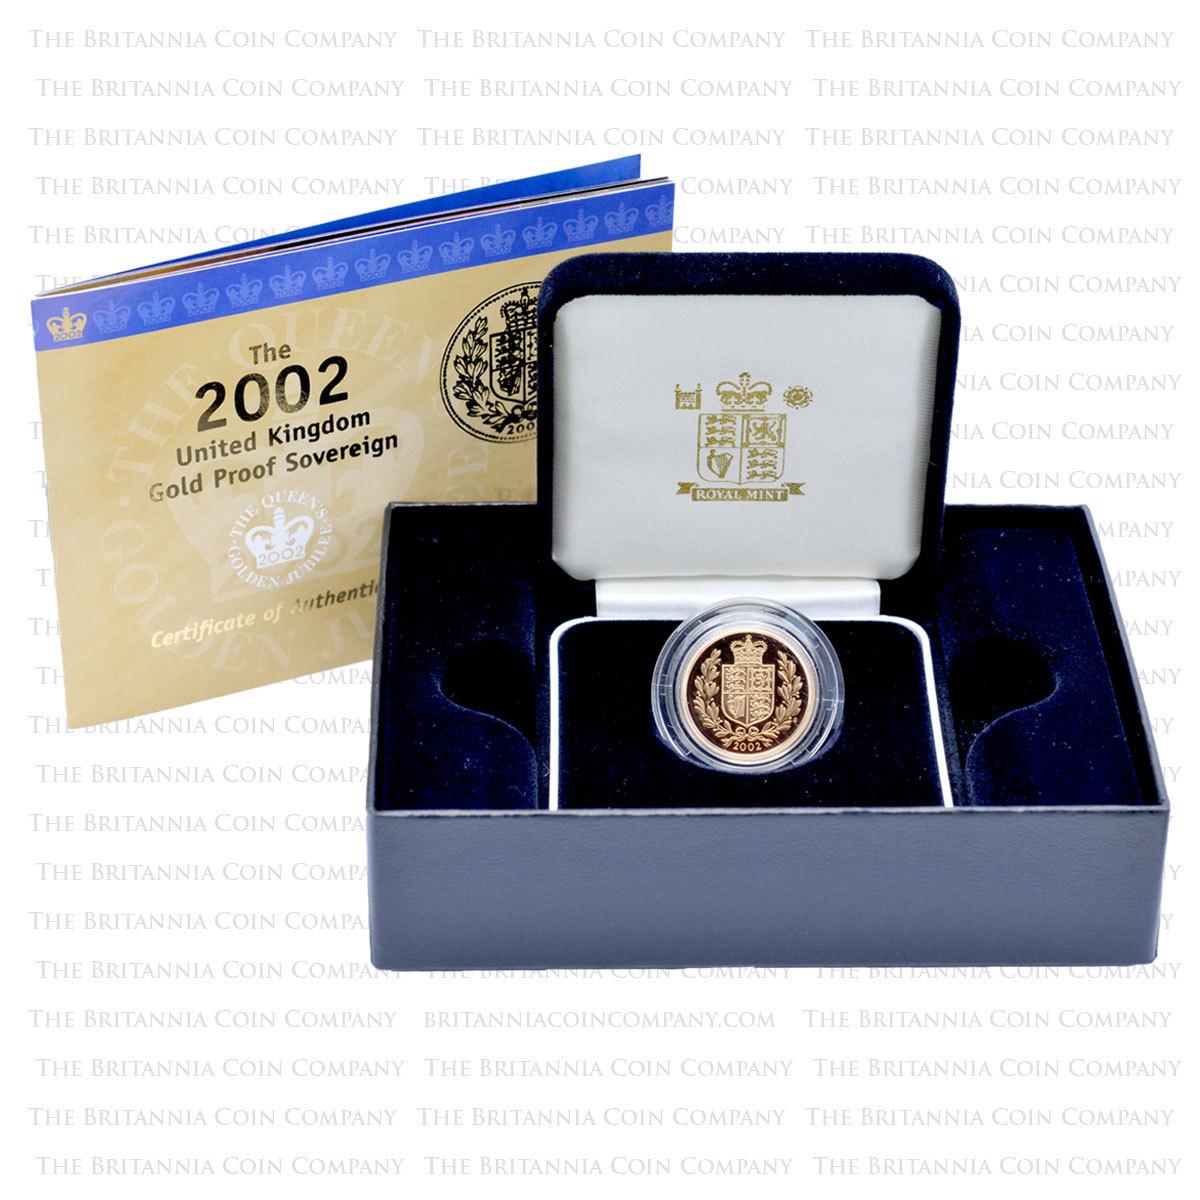 2002 Gold Proof Sovereign